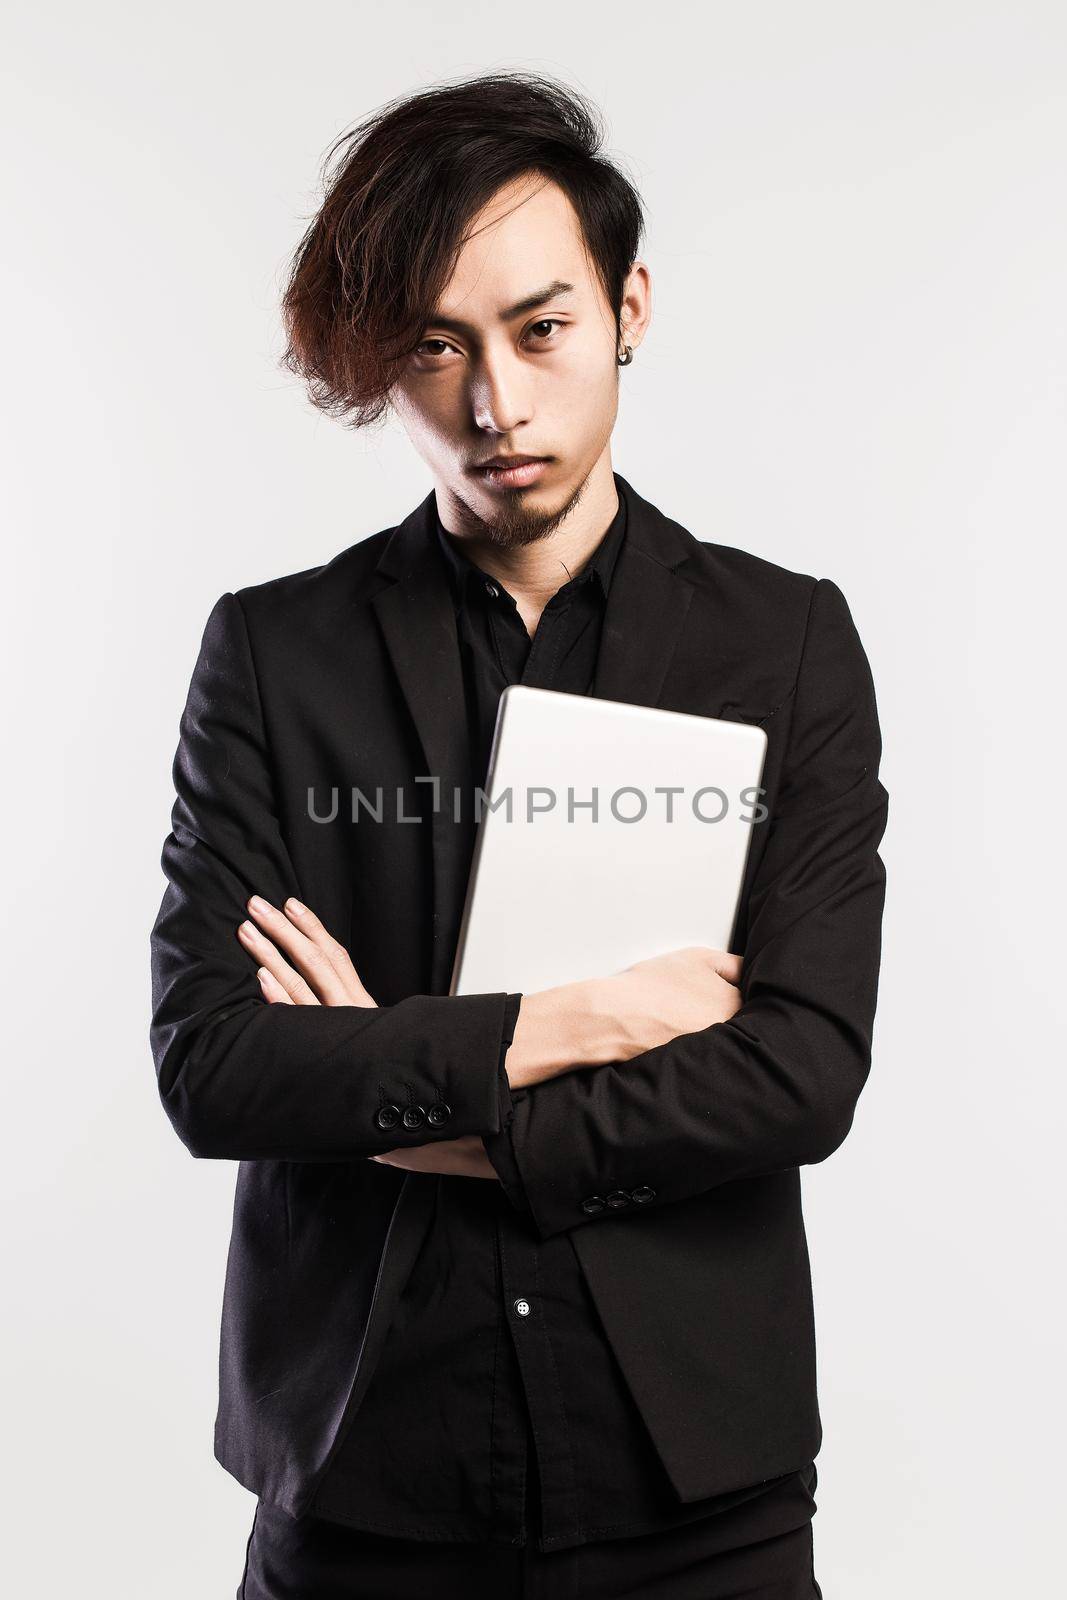 Serious young male executive using digital tablet against gray background